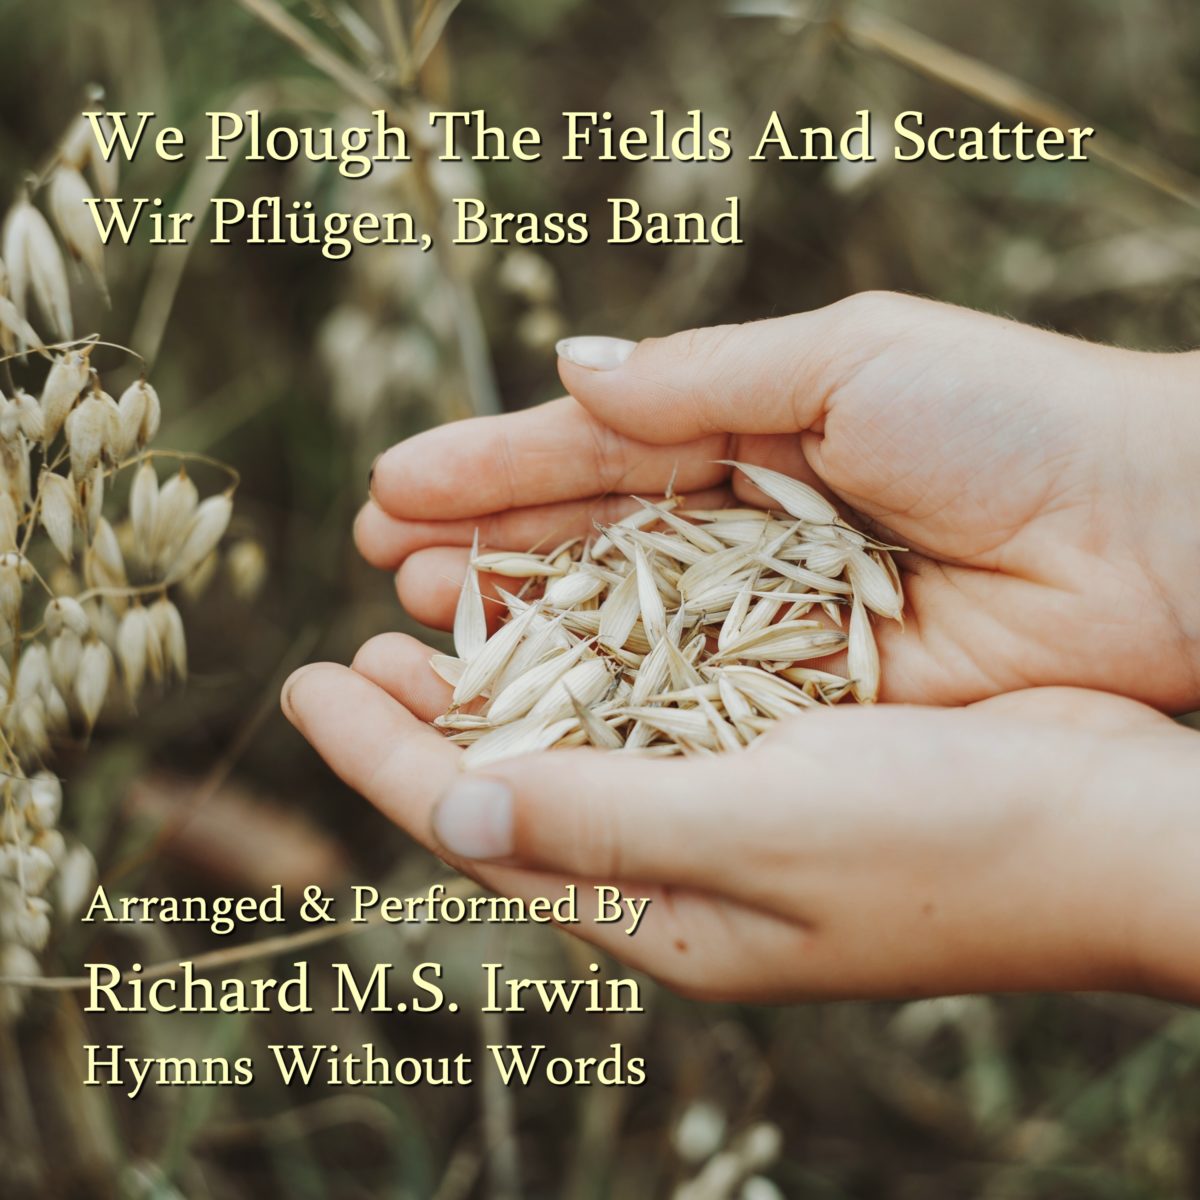 We Plough The Fields And Scatter (Wir Pflügen – 3 Verses) – Brass Band